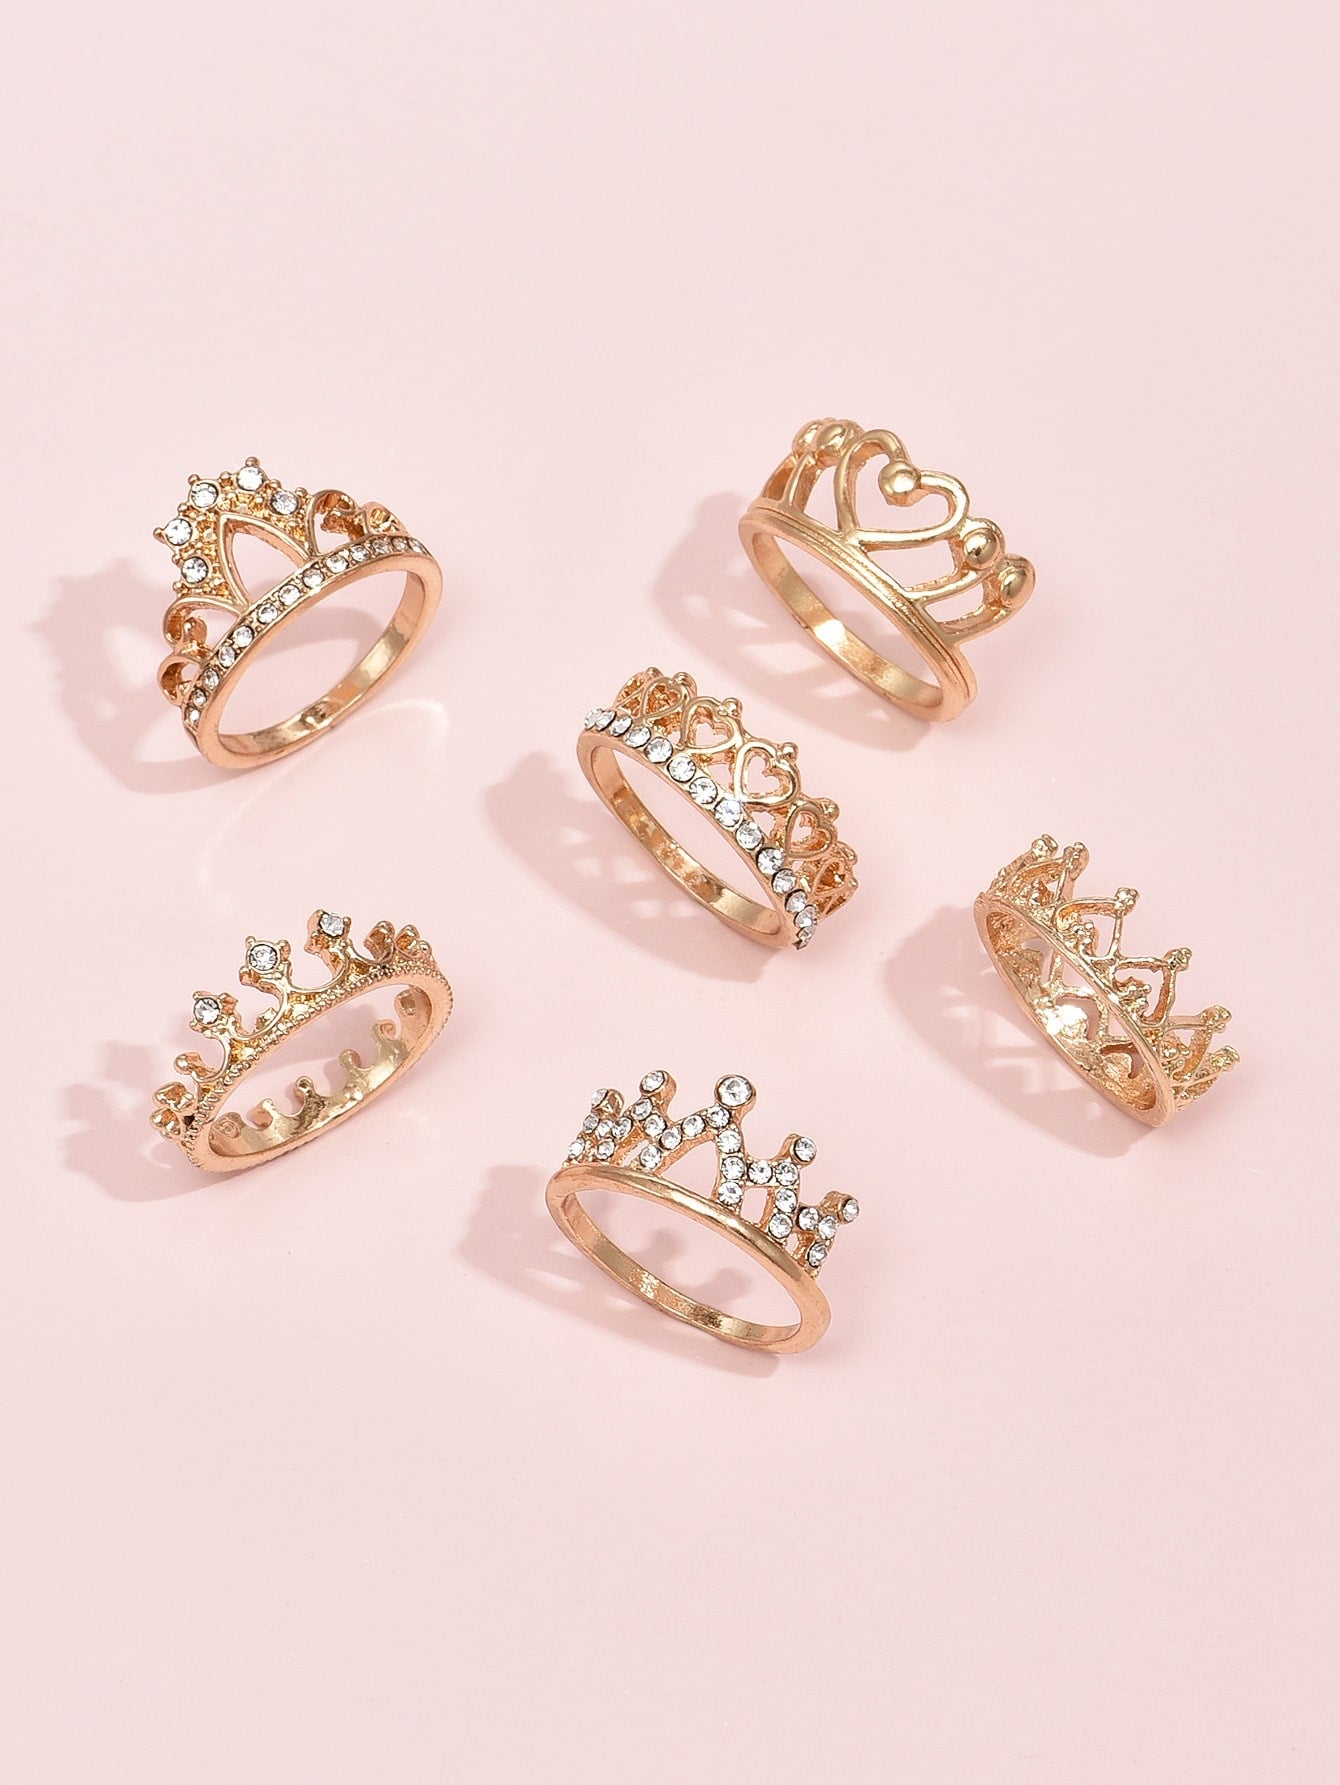 The Princess Collection Set Of 6 Crown Rings